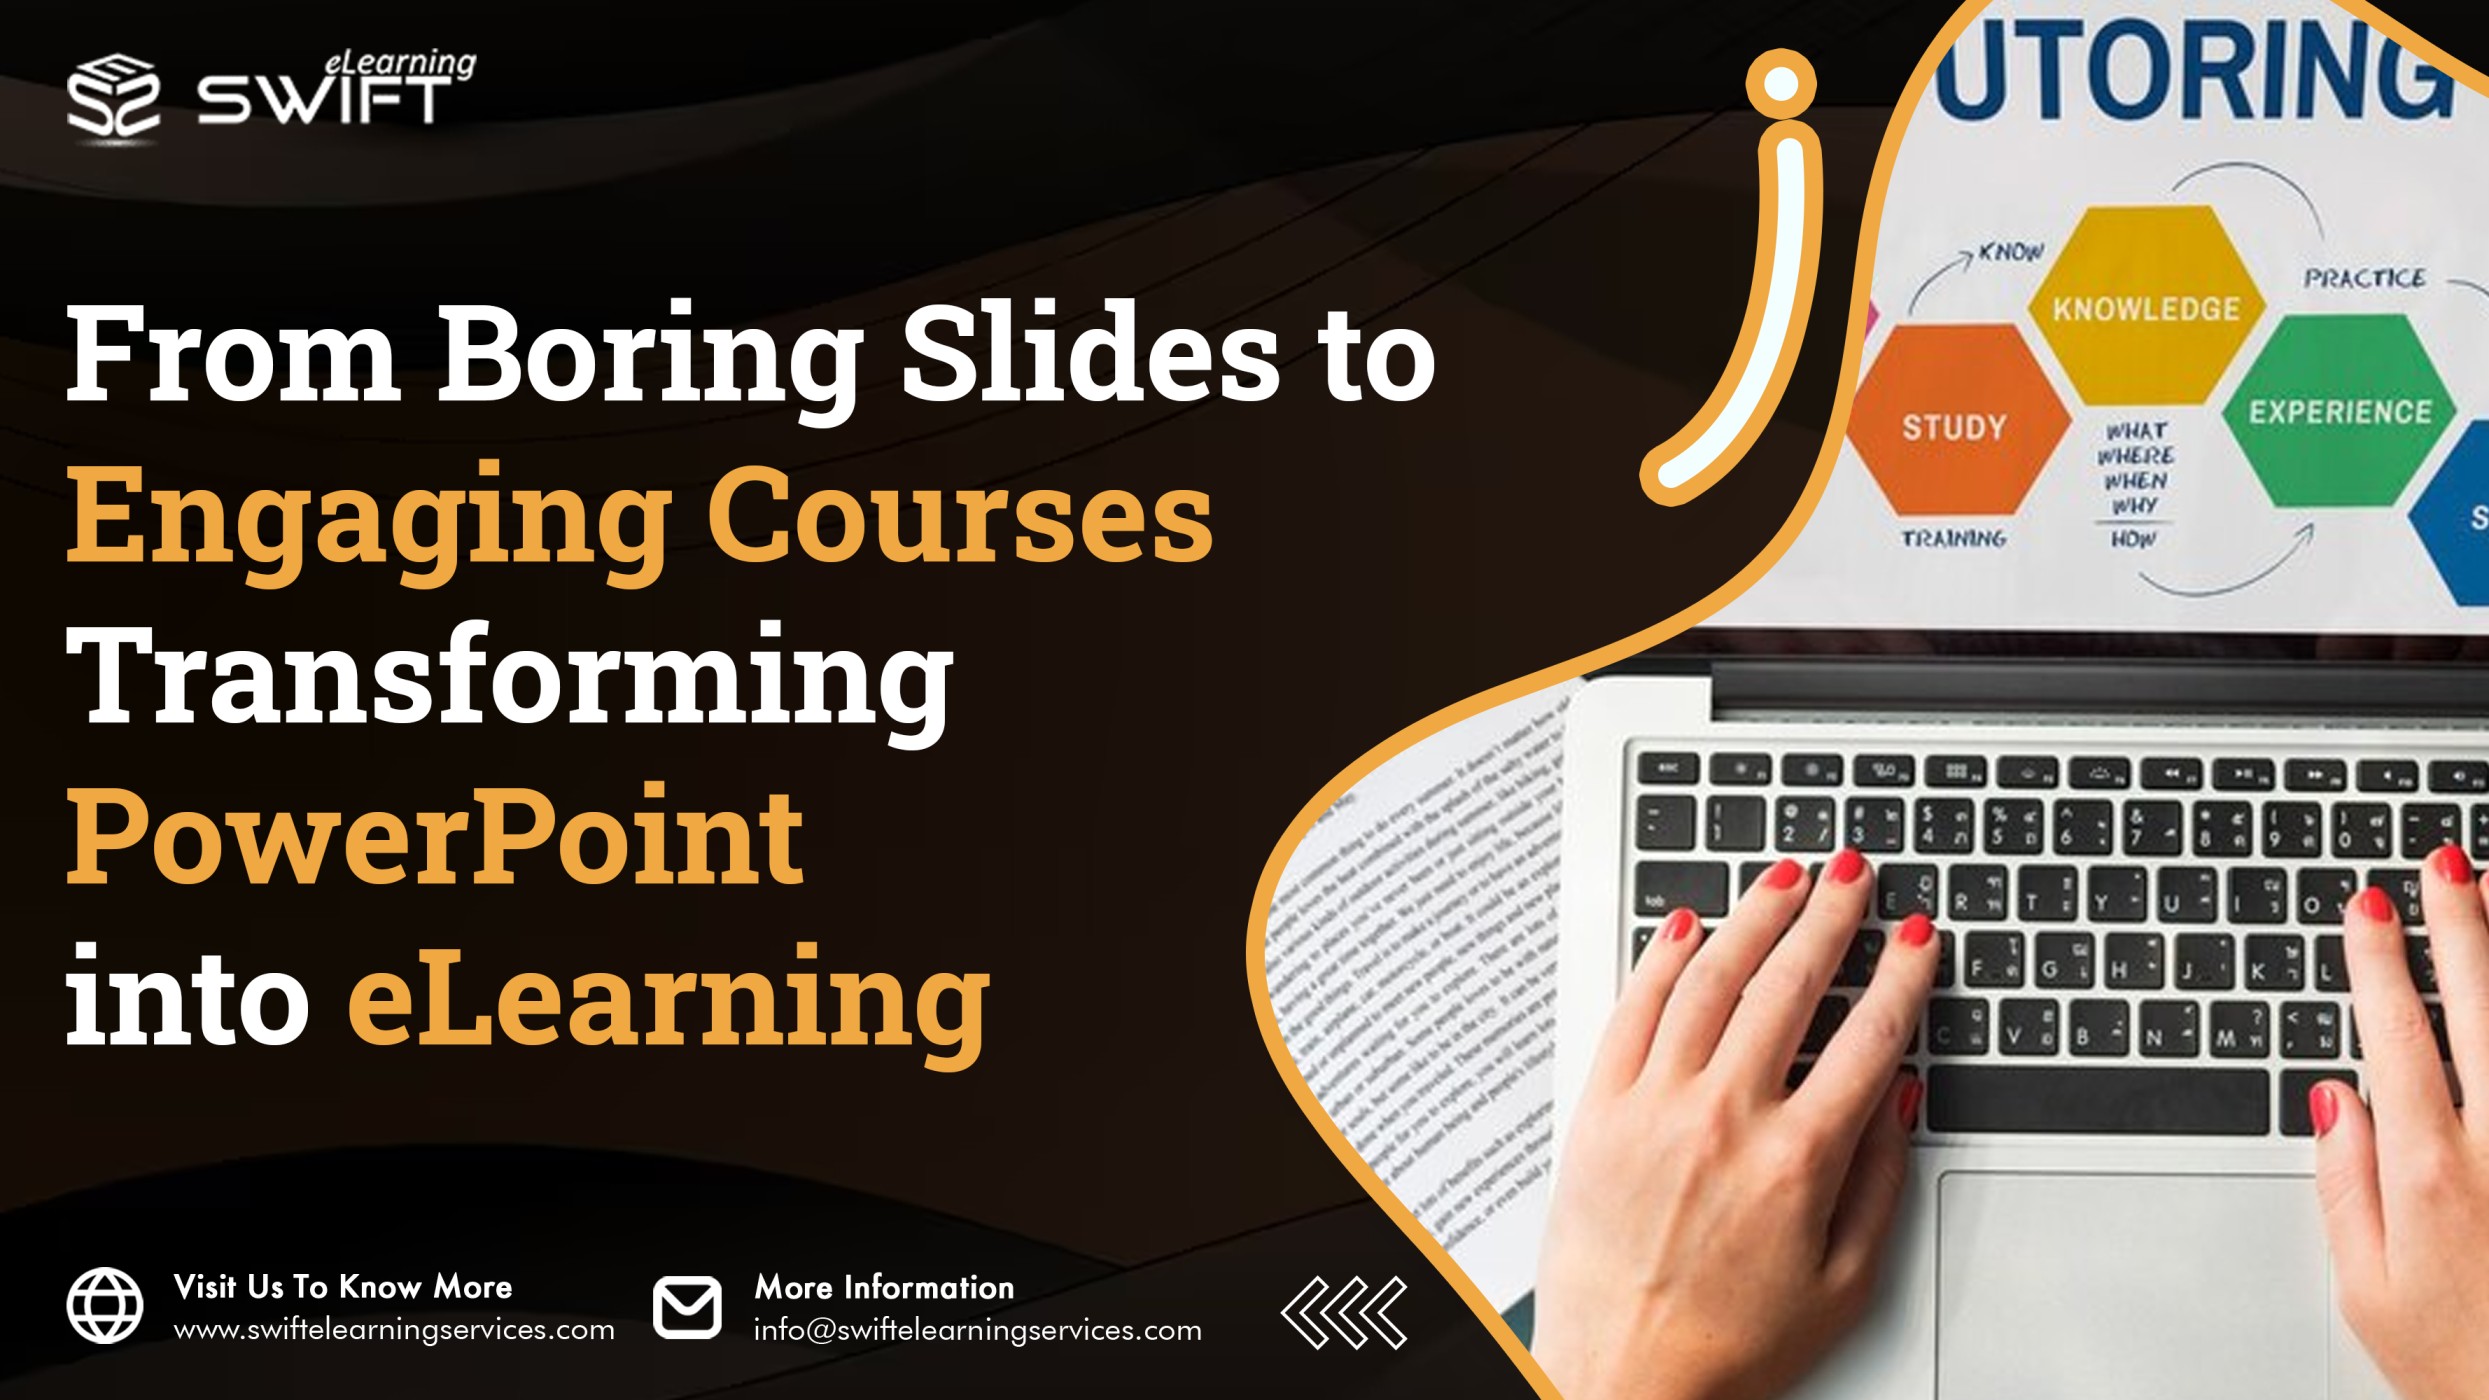 PowerPoint into eLearning From Boring Slides to Engaging Courses: Transforming PowerPoint into eLearning